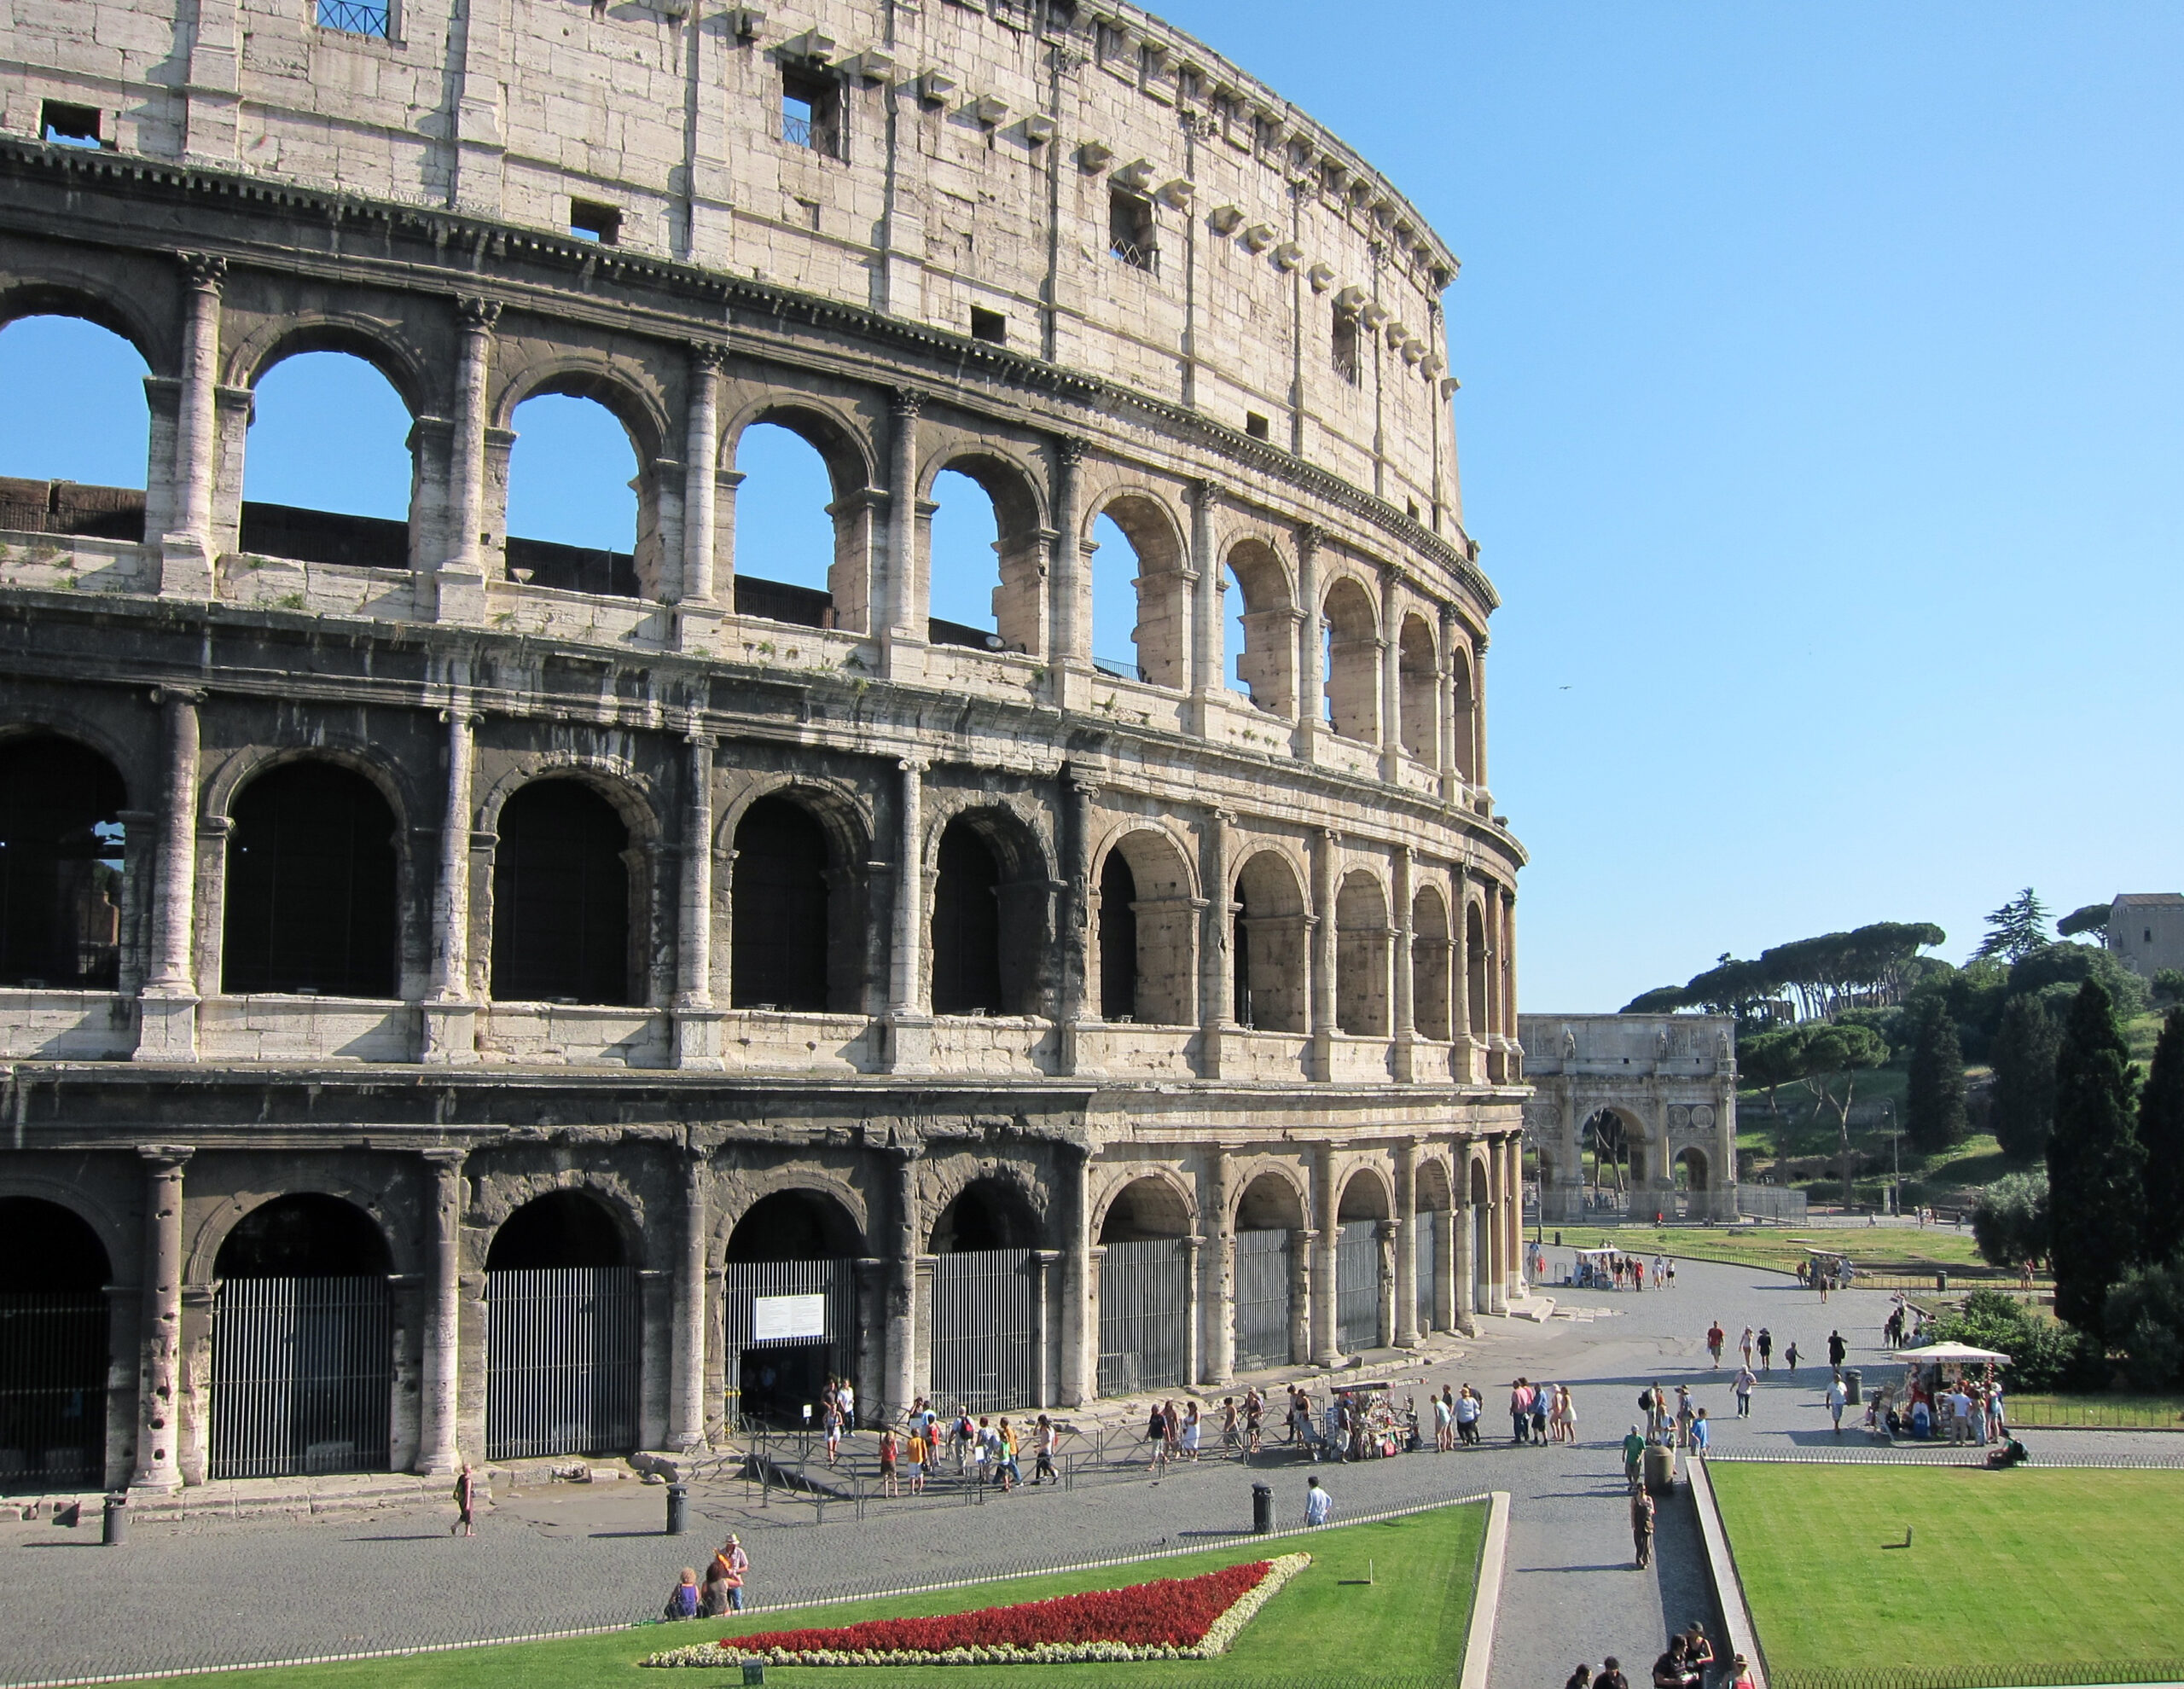 Rome's historic center was declared a UNESCO World Heritage site in 1980. Colosseum (Flavian Amphitheater), Rome, c. 70–80 C.E., 189 x 156 m (photo: Dr. Kimberly Cassibry, CC BY-NC-SA 4.0)